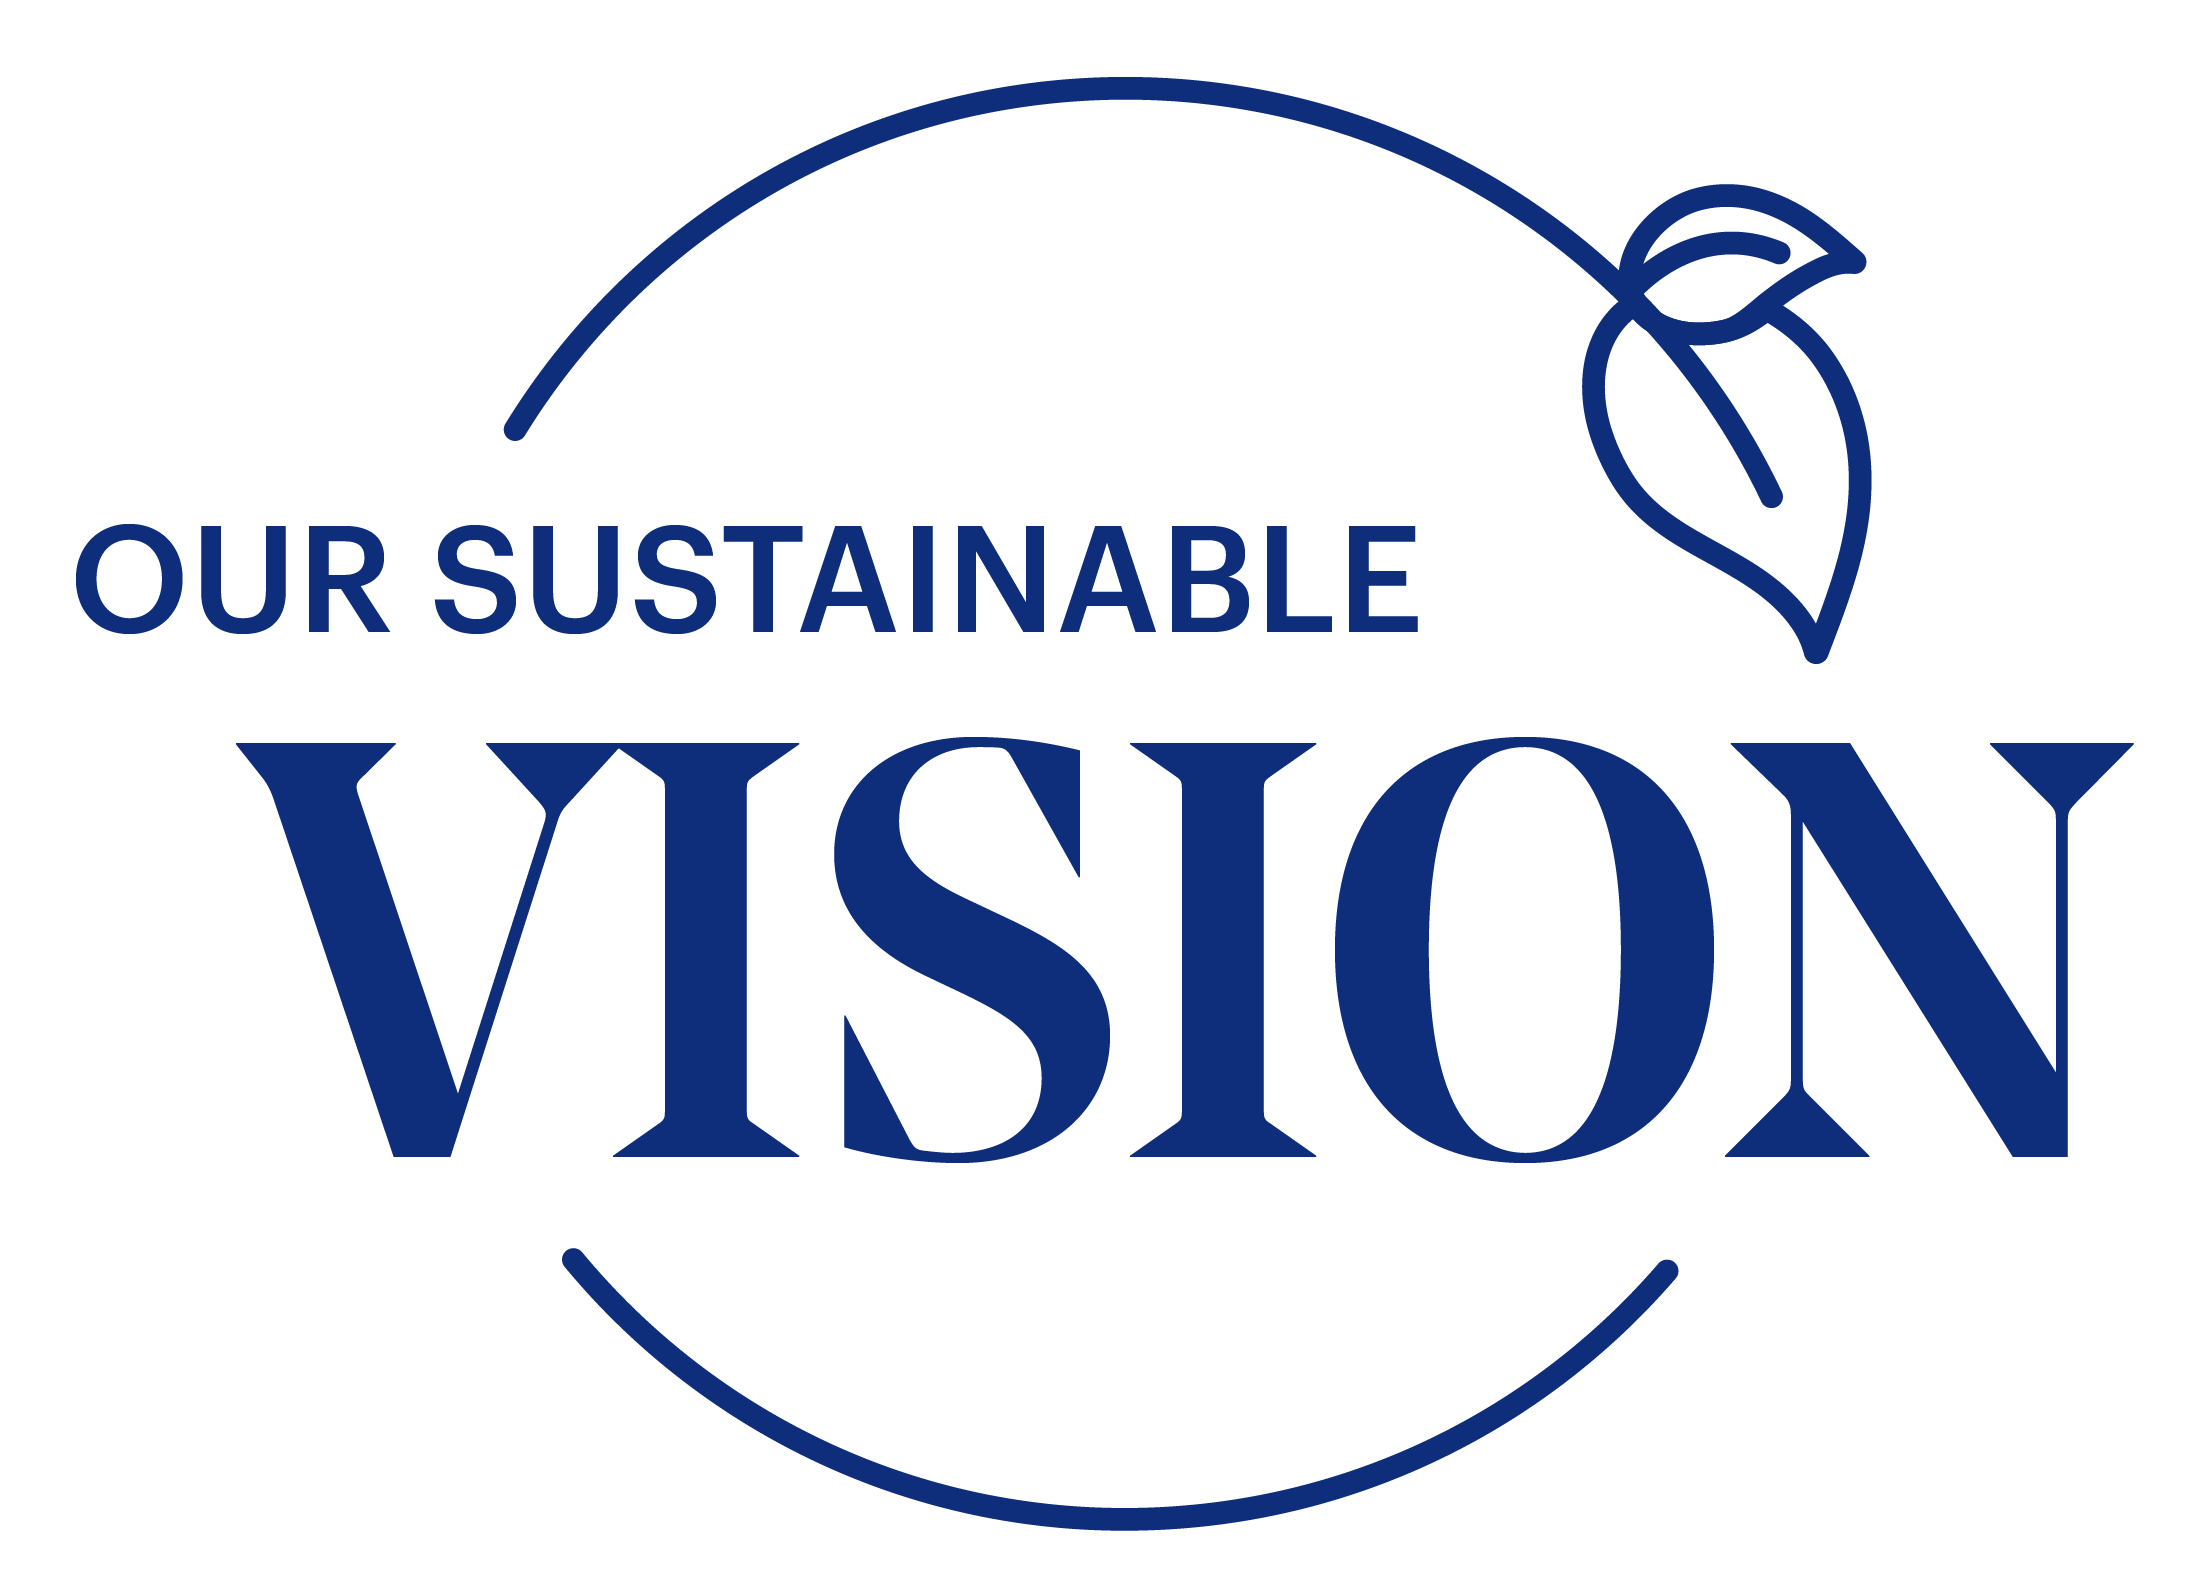 OUR SUSTAINABLE VISION